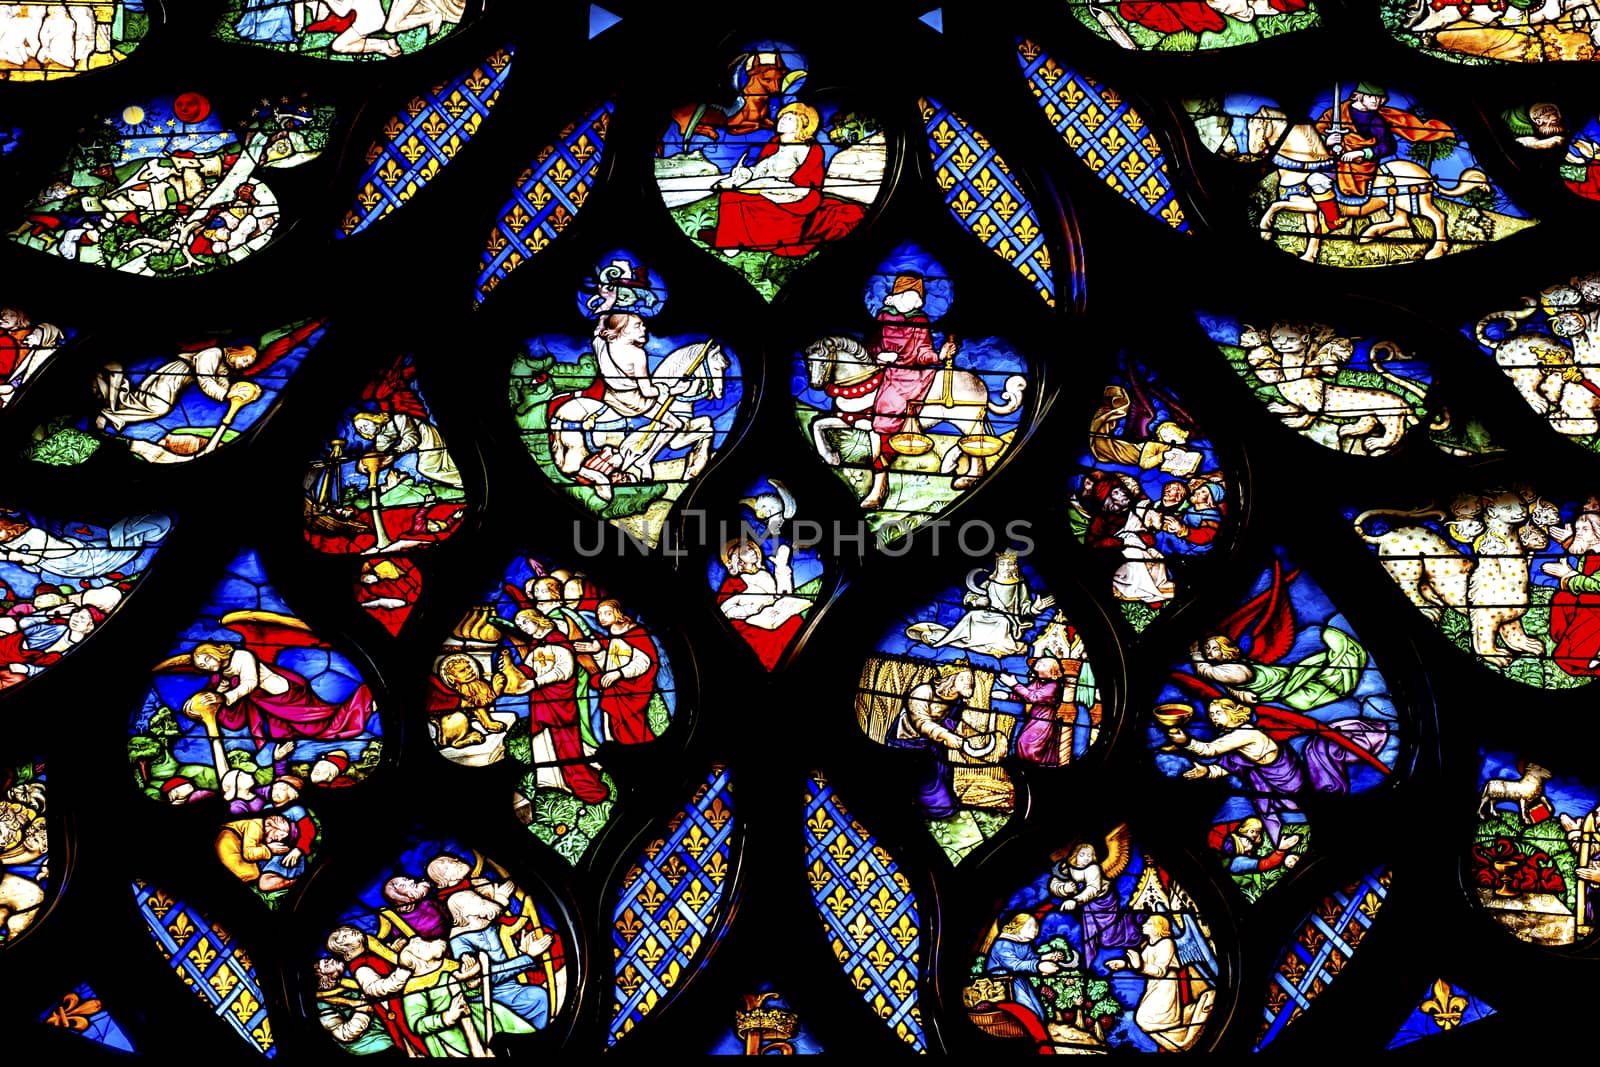 Biblical Medieval Stories Horses Angels  Rose Window Stained Glass Saint Chapelle Paris France.  Saint King Louis 9th created Sainte Chappel in 1248 to house Christian relics, including Christ's Crown of Thorns.  Stained Glass created in the 13th Century and shows various biblical stories along wtih stories from 1200s.